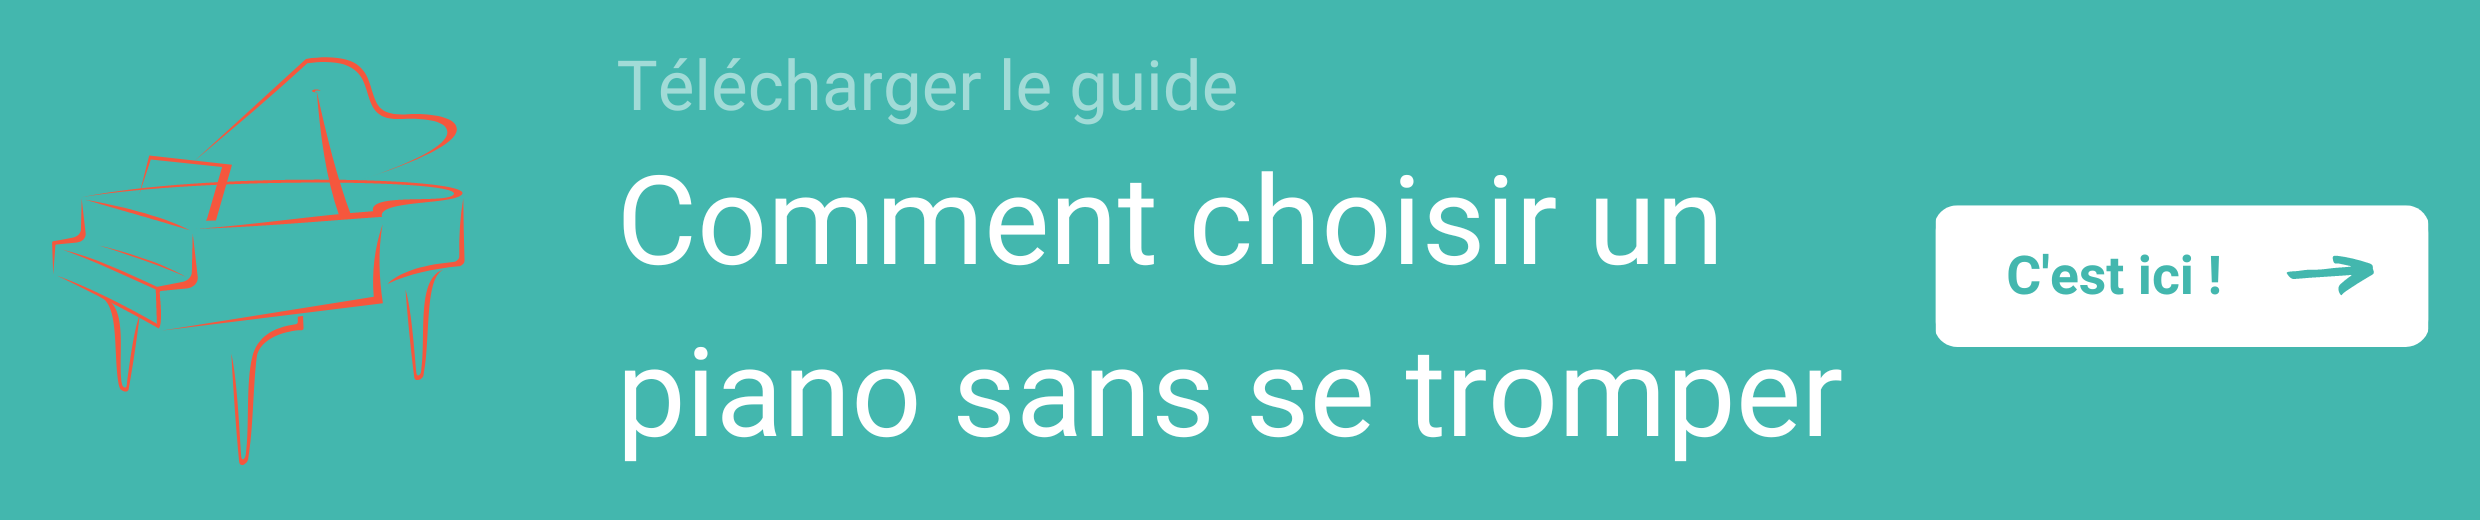 Guide comment choisir son piano